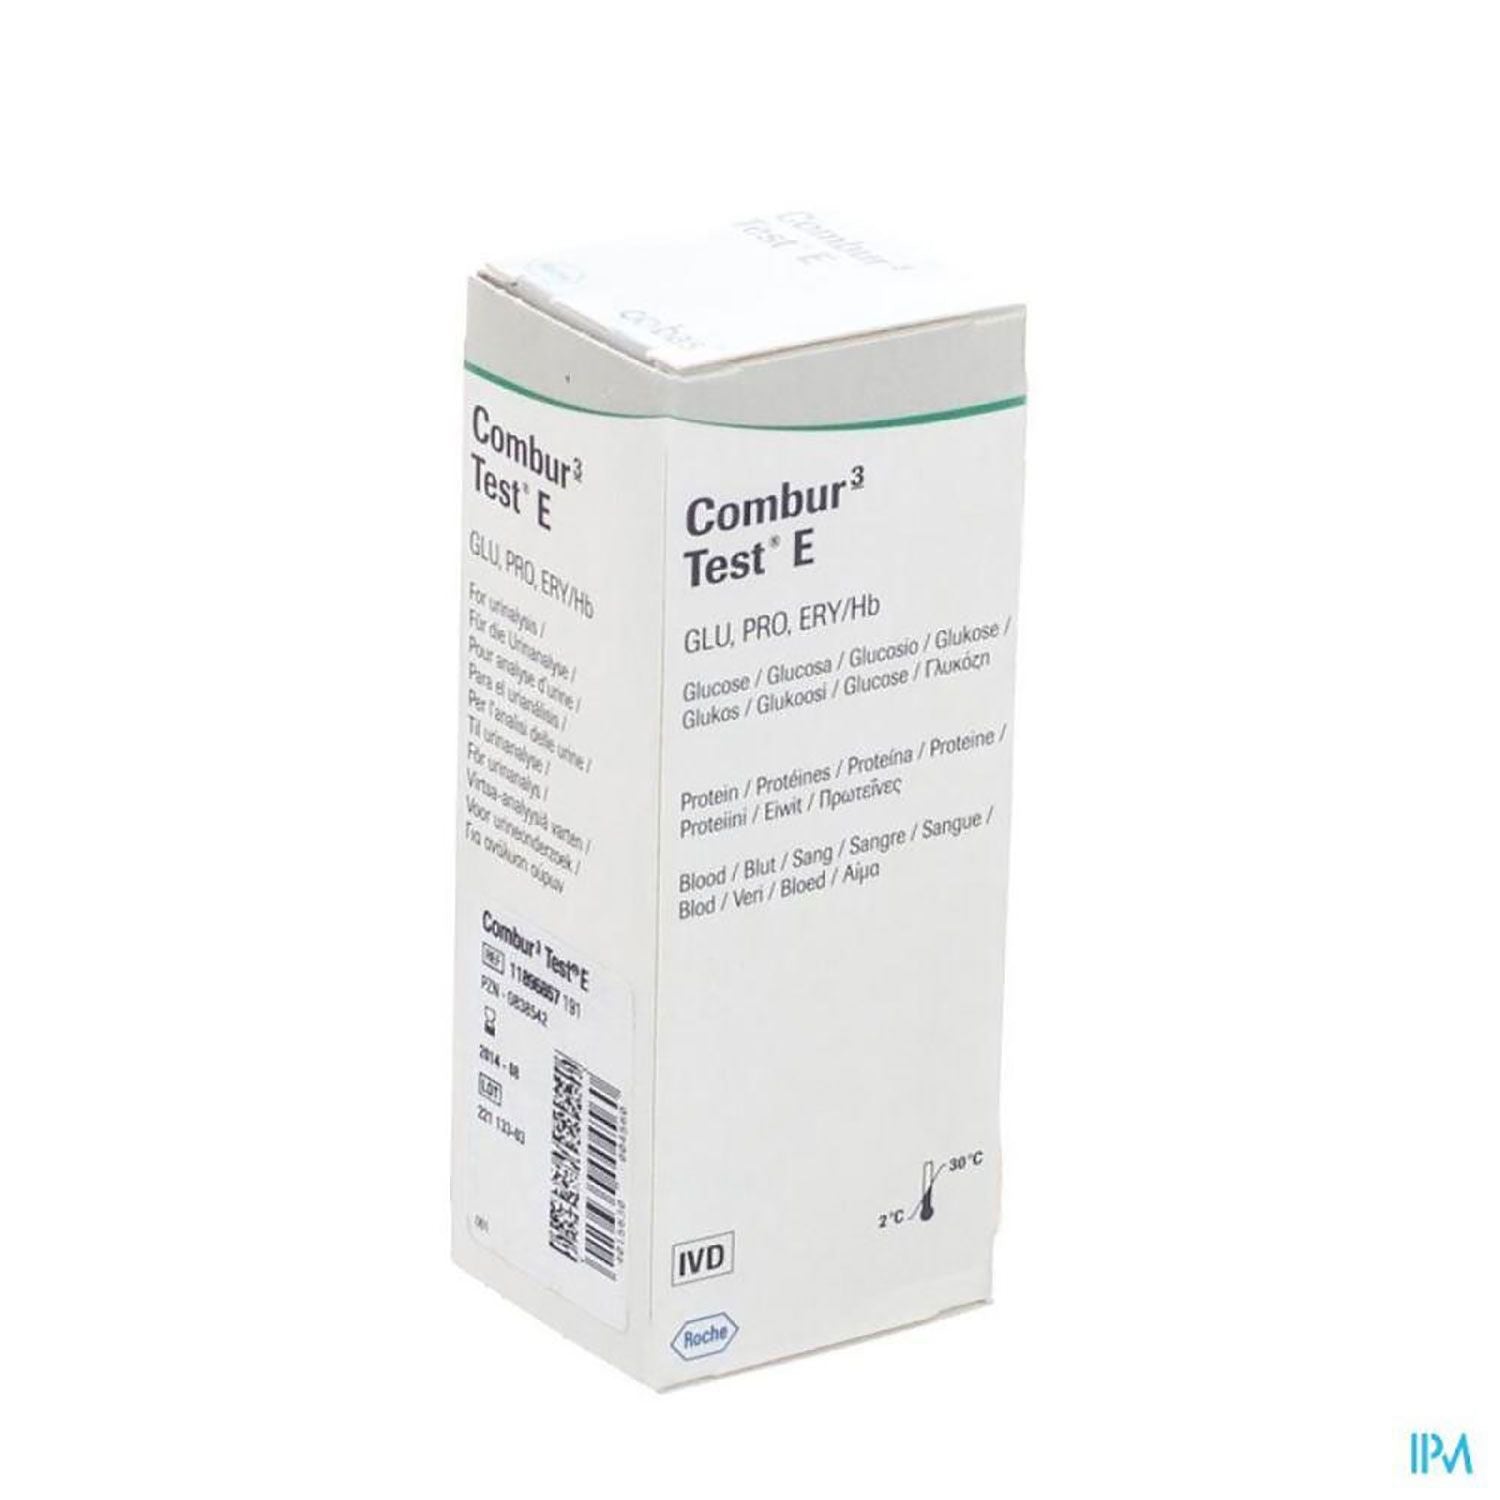 Roche Urinalysis Reagent Strips Combur3 Test | Pack of 50